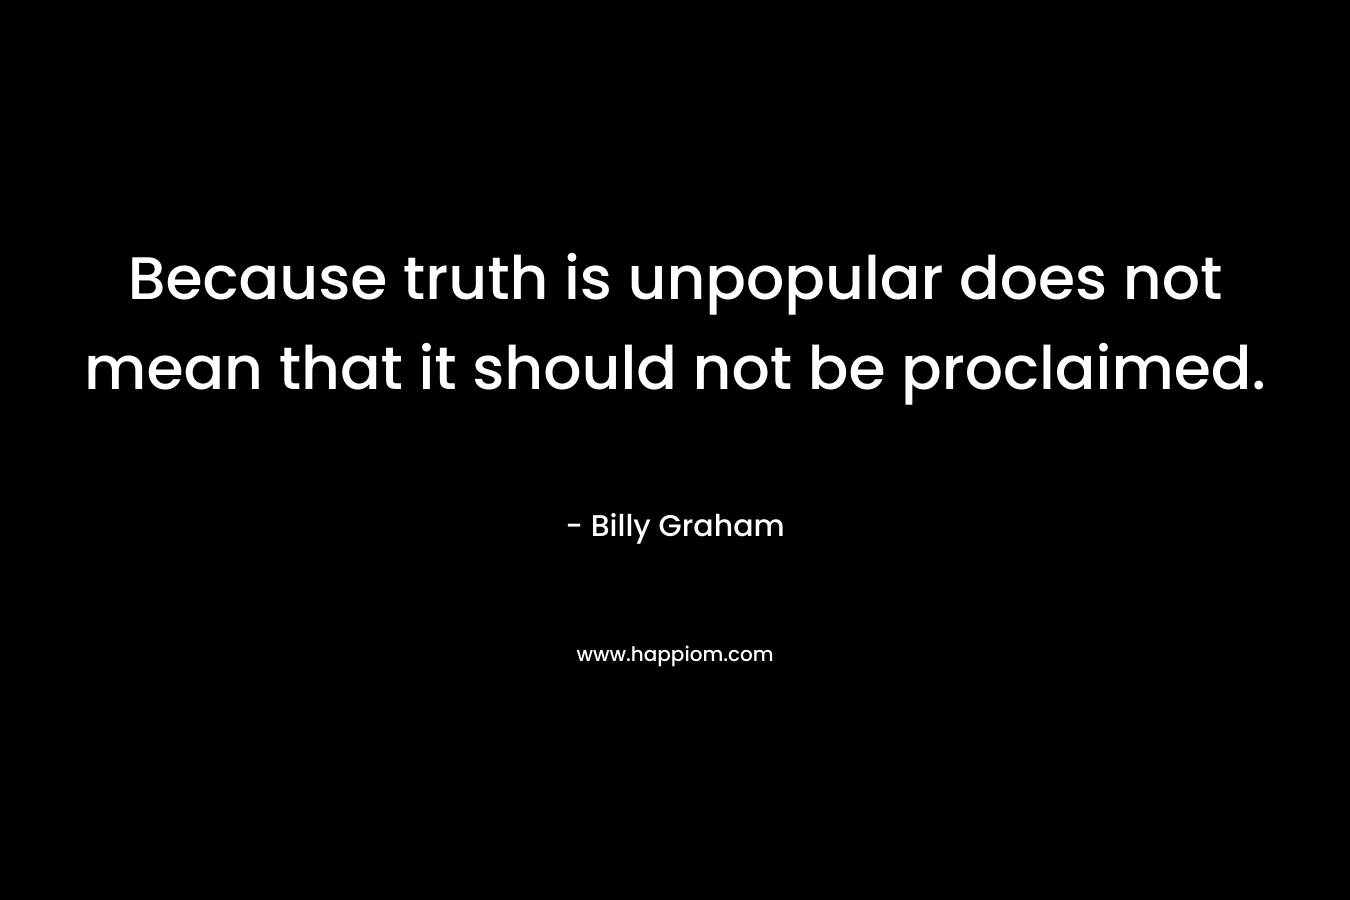 Because truth is unpopular does not mean that it should not be proclaimed. – Billy Graham